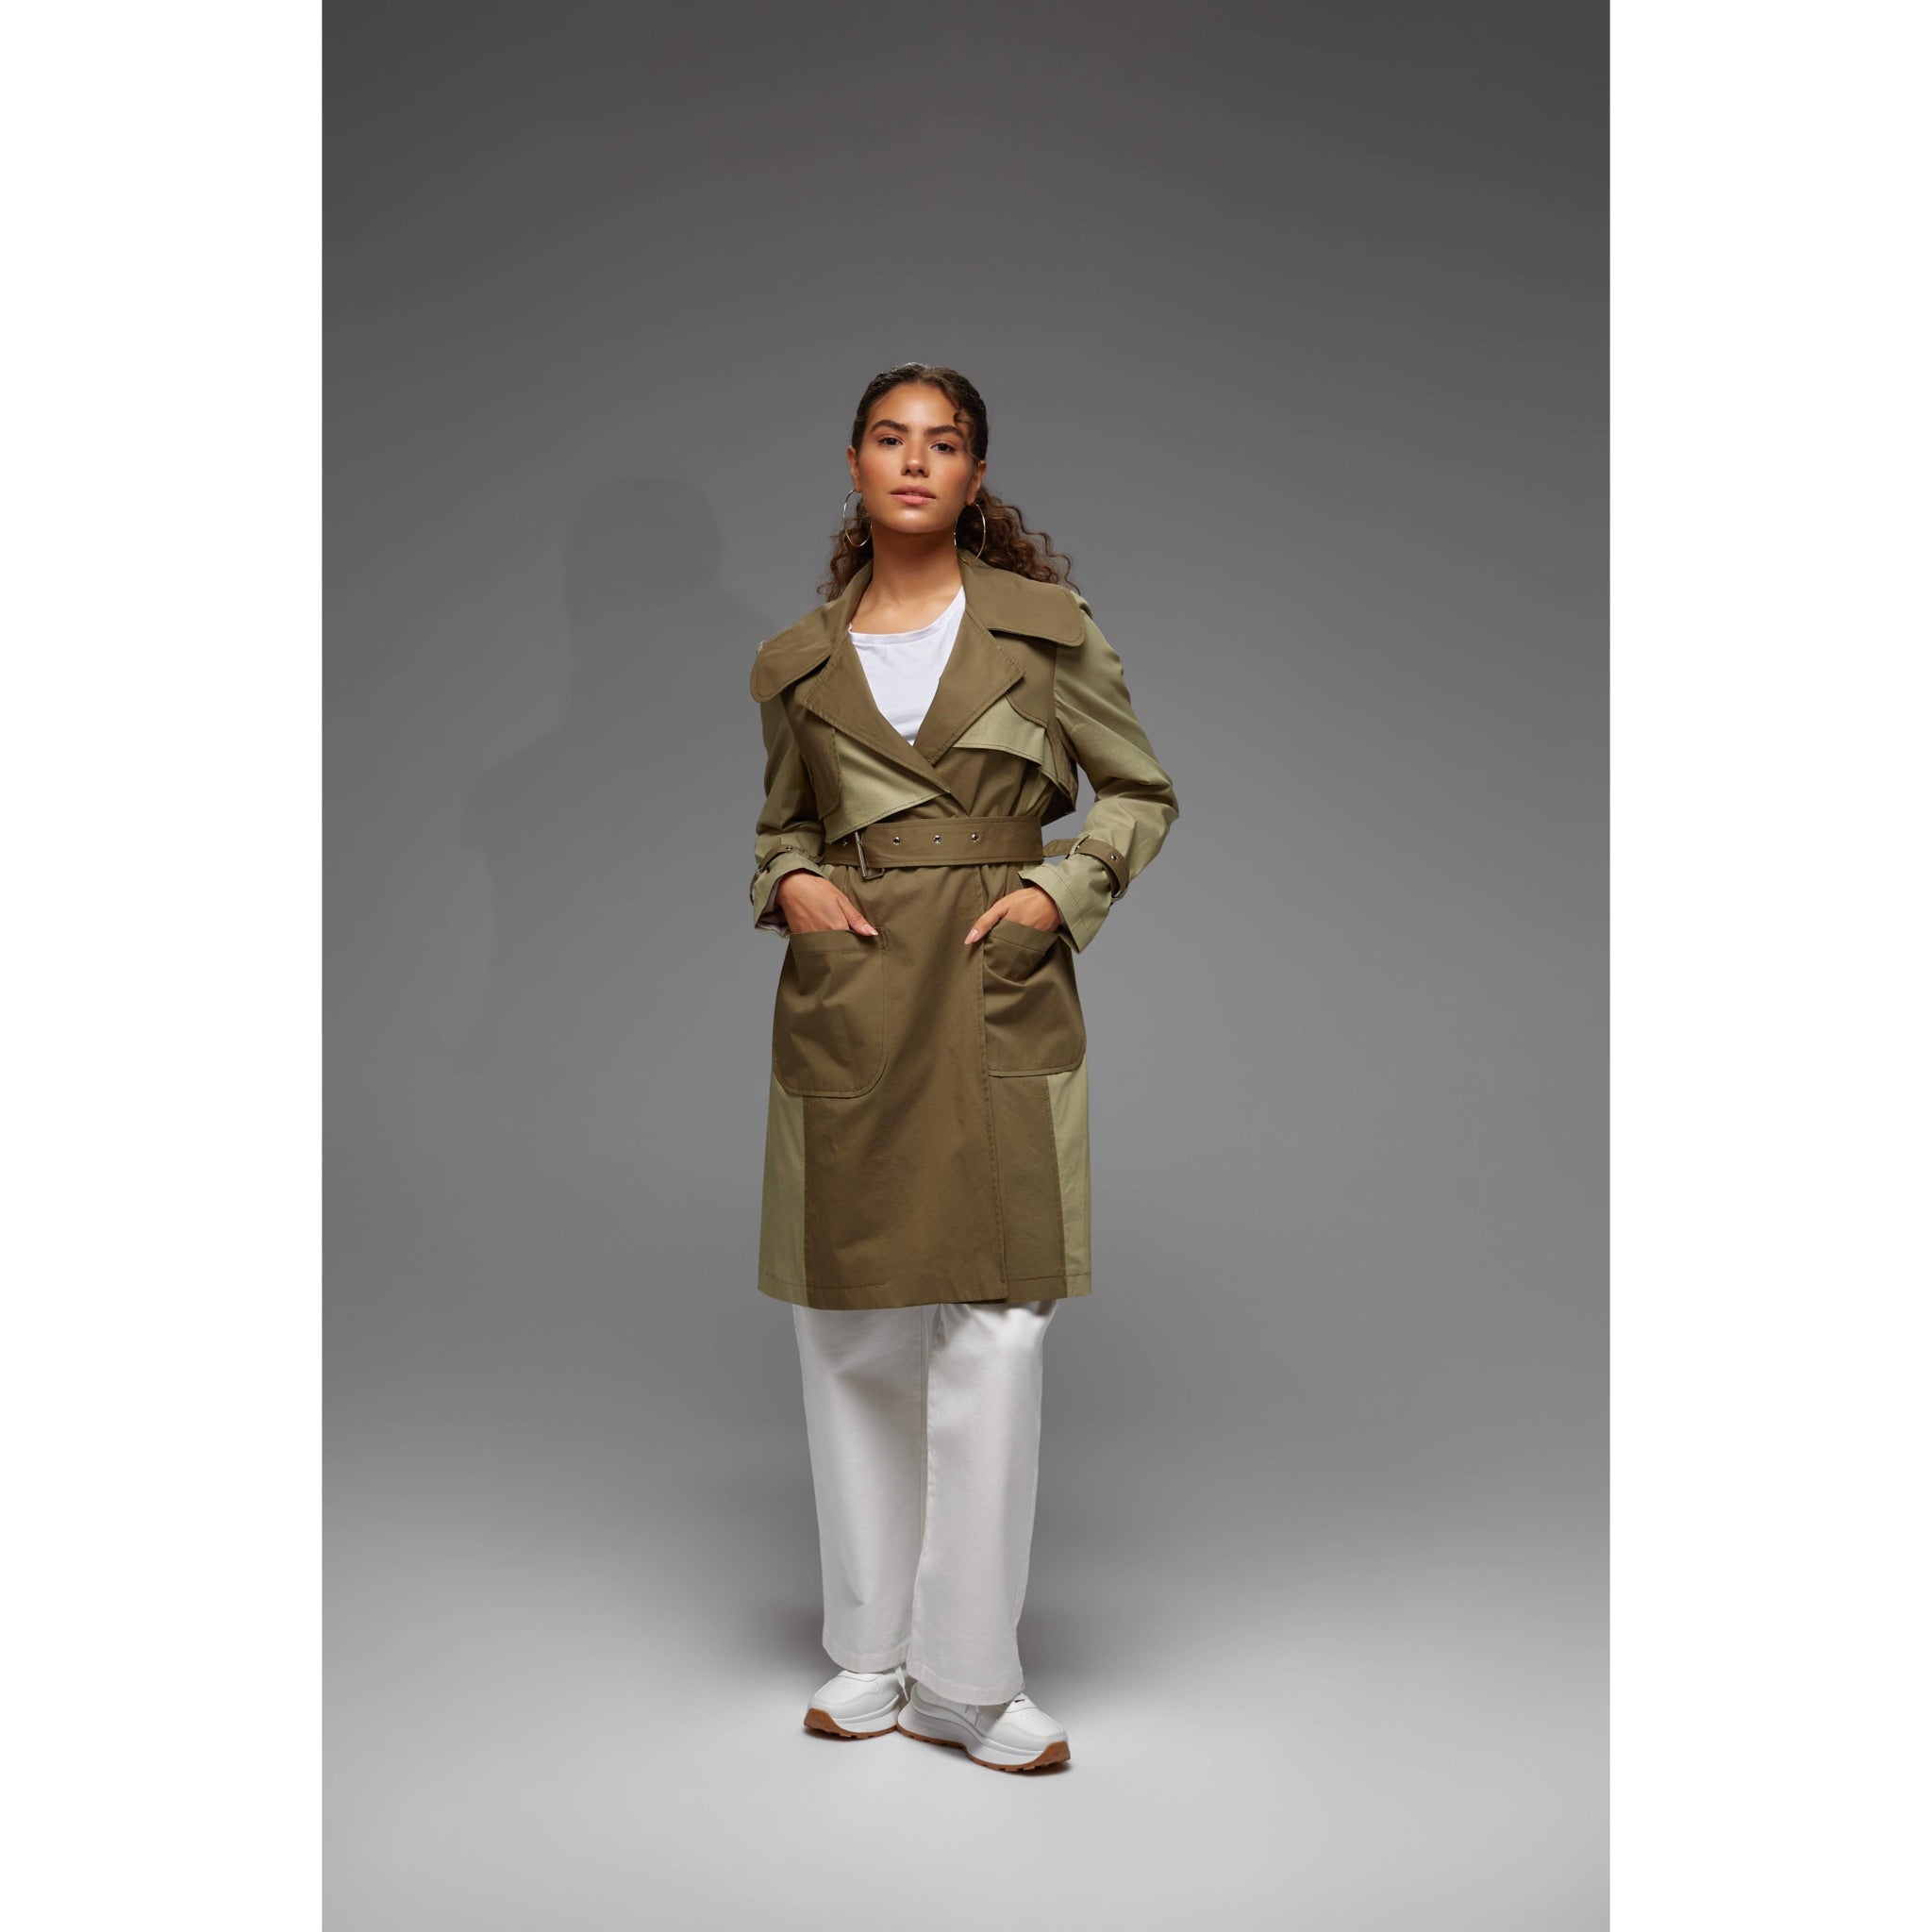 Dual Colored Trench Coat in Dark olive & Light olive